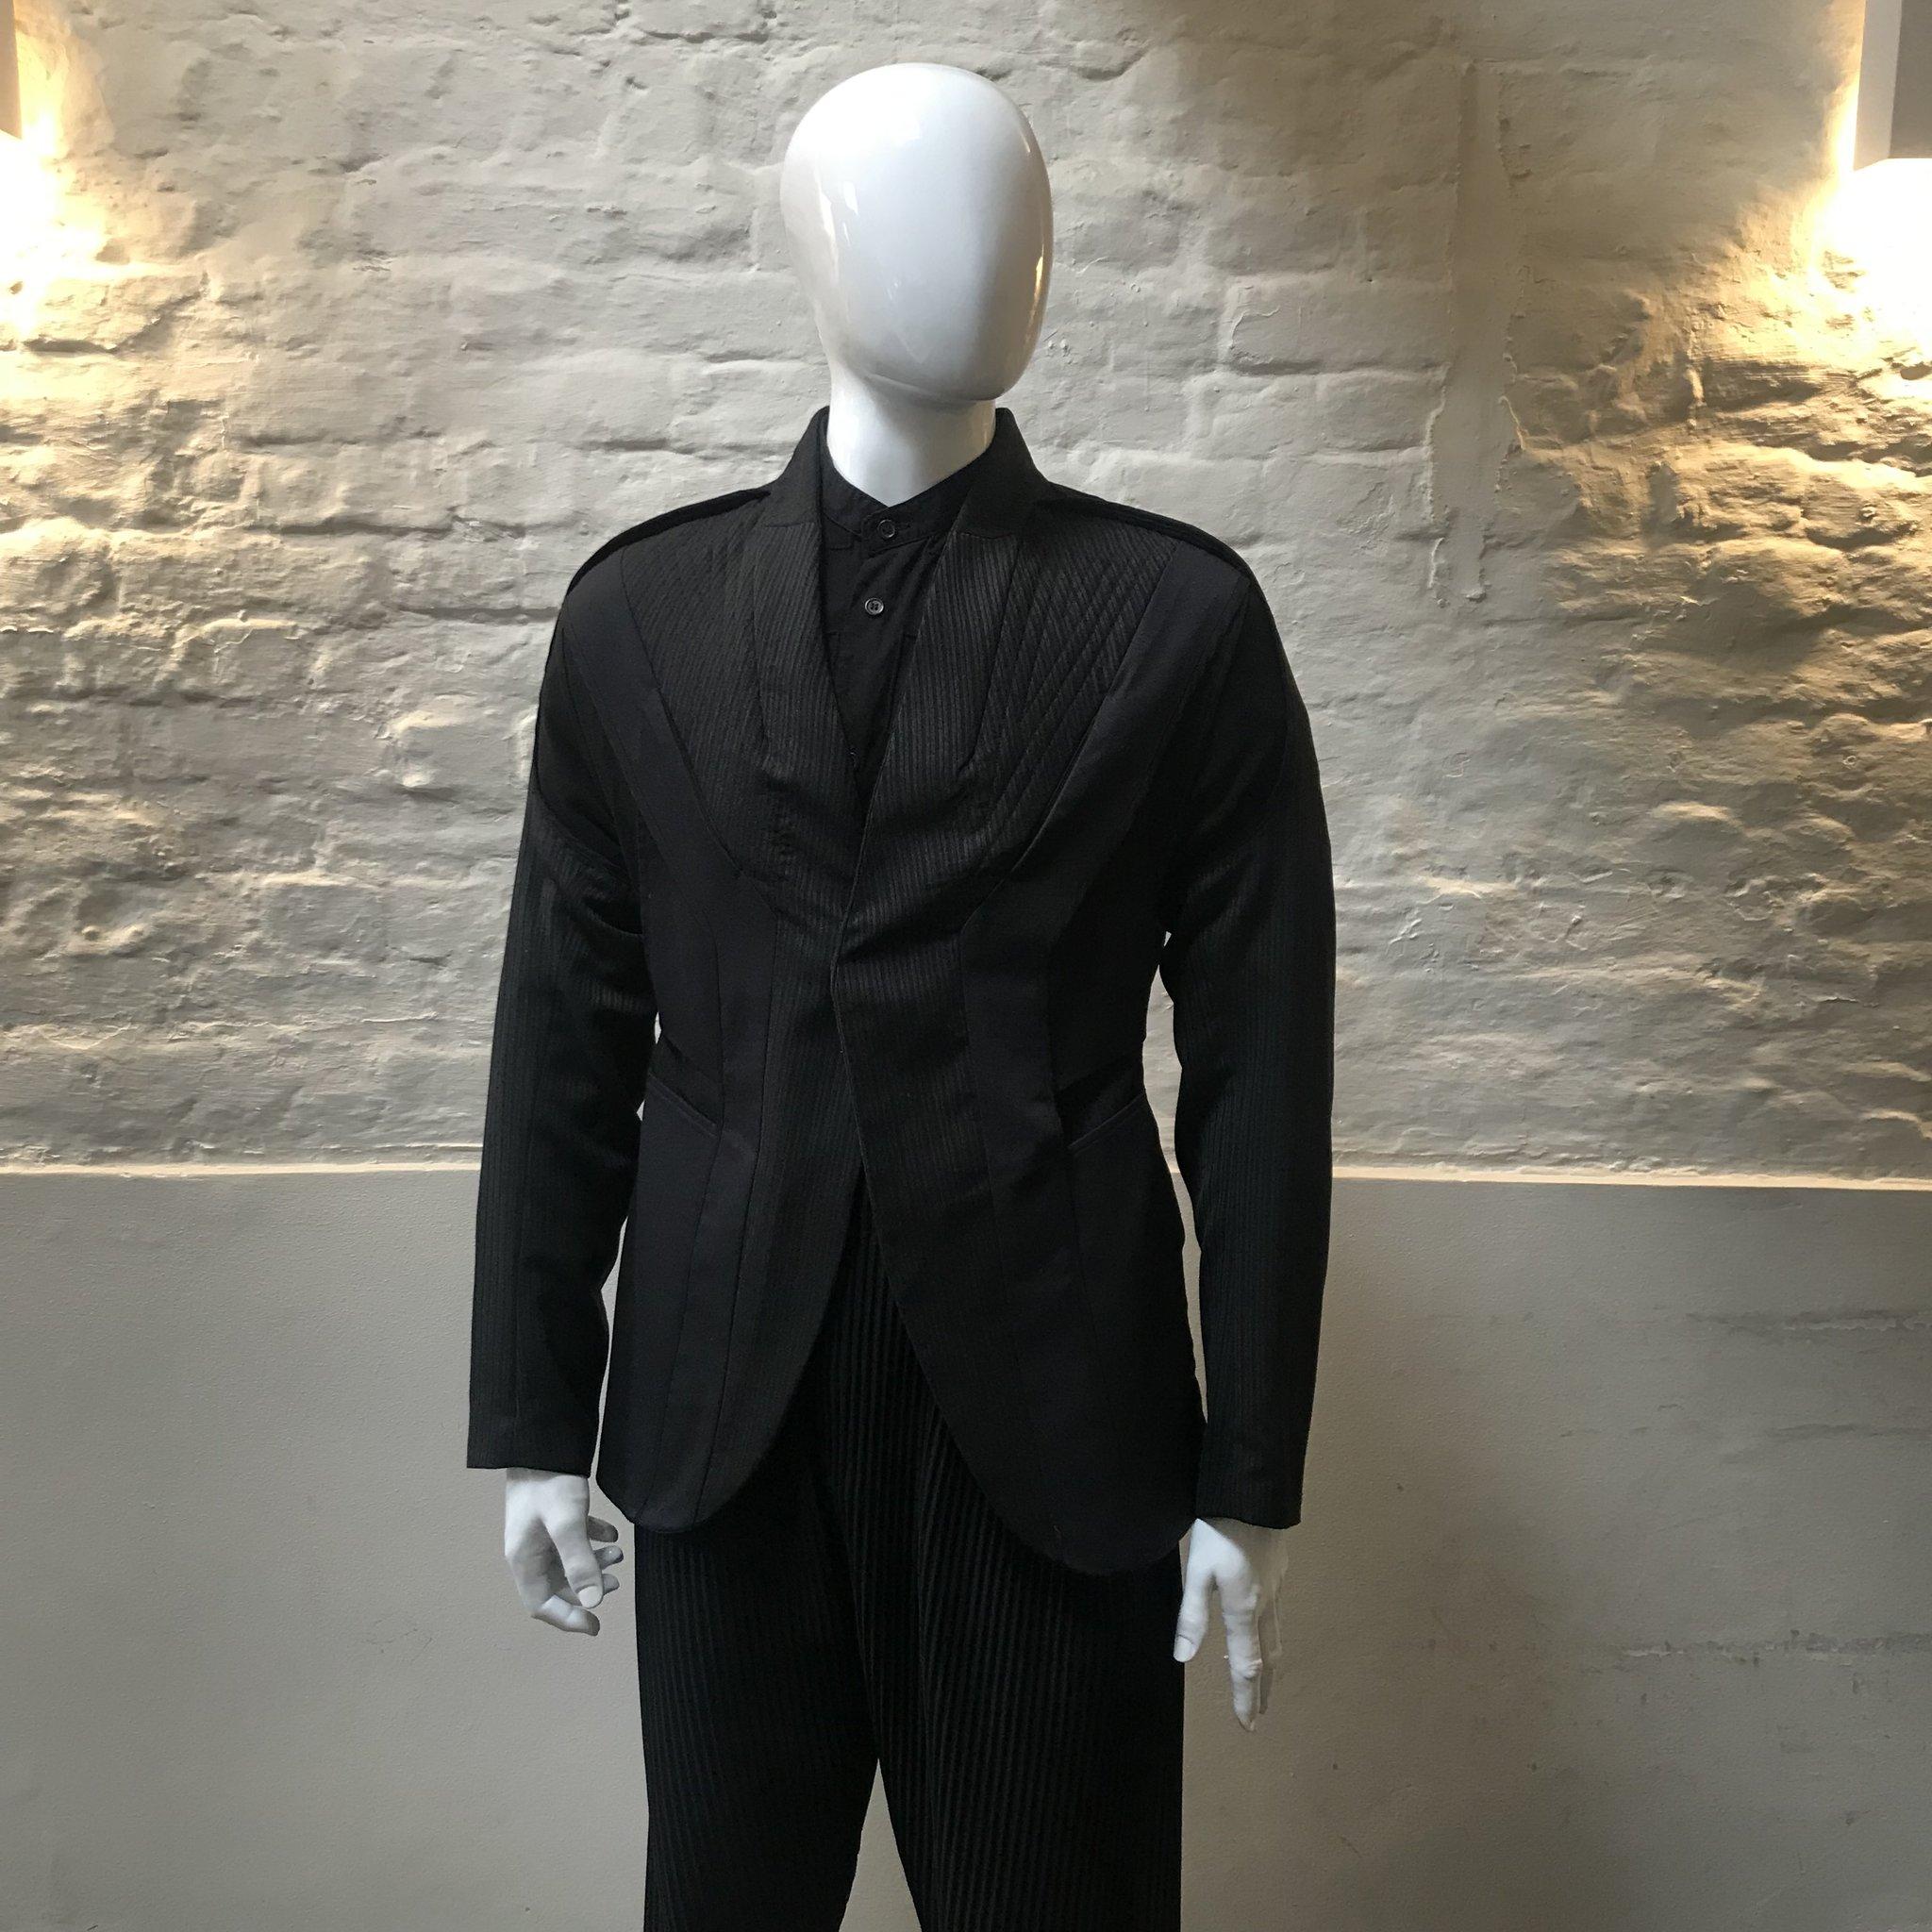 Abasi Rosborough Tailored Single Breast Jacket made in USA from cotton. 

The Abasi Rosborough aesthetic focuses on comfort, flexibility, integrity and sustainability by creating natural clothing using recycled deadstock fabrics found in warehouses